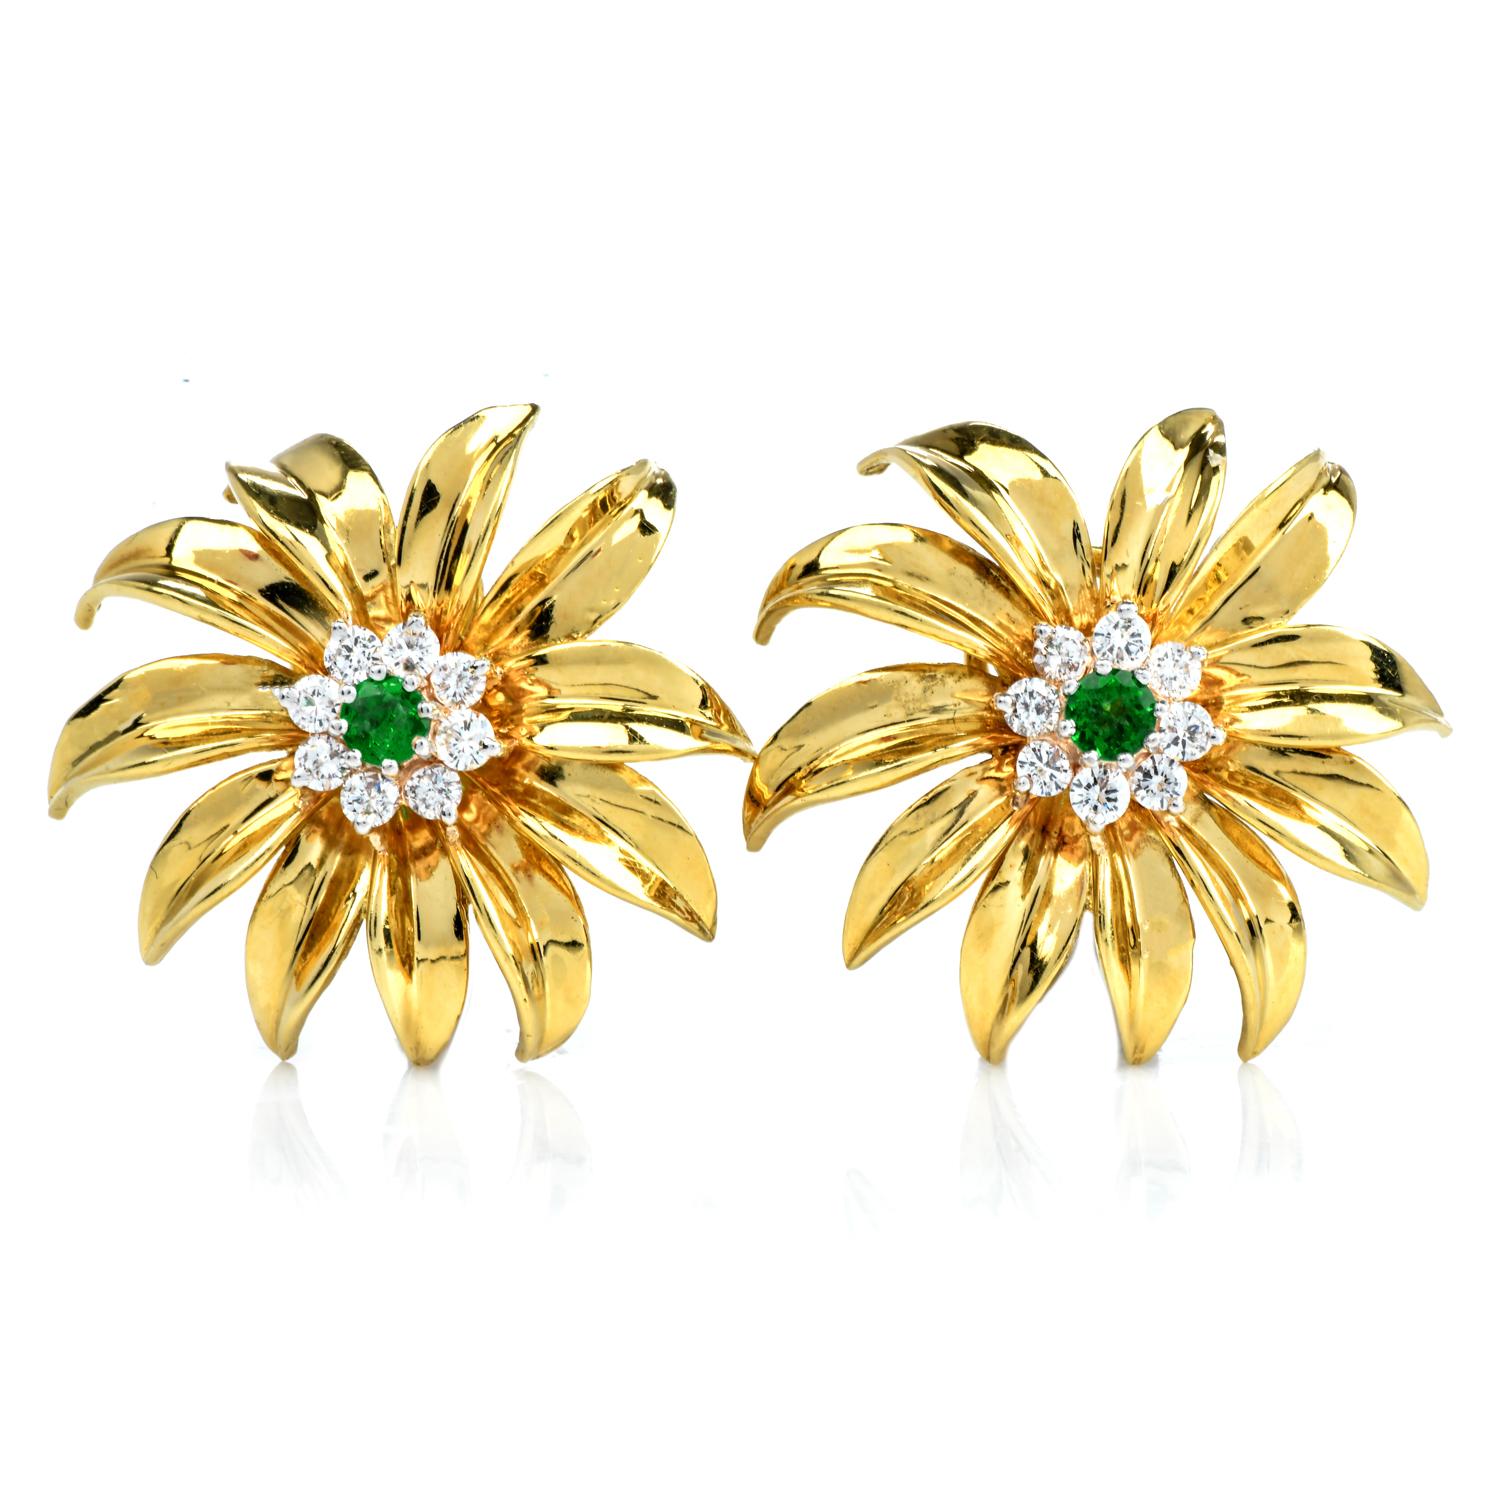 Highly polished and sparkly tropical flower clip earrings from the house of Tiffany & co.

Crafted in solid 18K Yellow Gold.

Each flower is adorned by (16) round cut diamonds, weighing collectively 1.50 carats (F-G color & VVS clarity) 

Centered